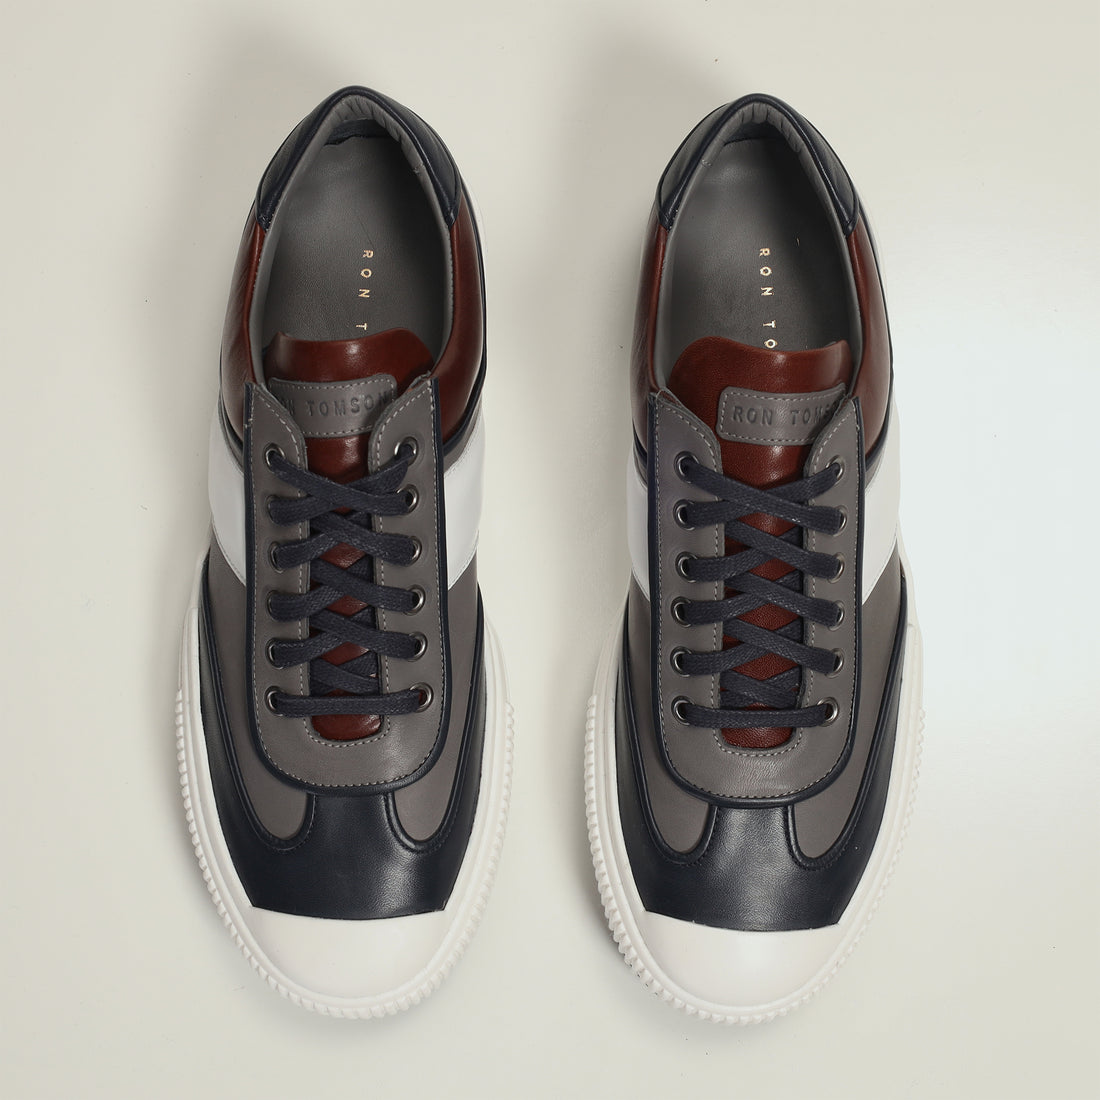 Multi Leather Lace Up Sneakers - Navy White